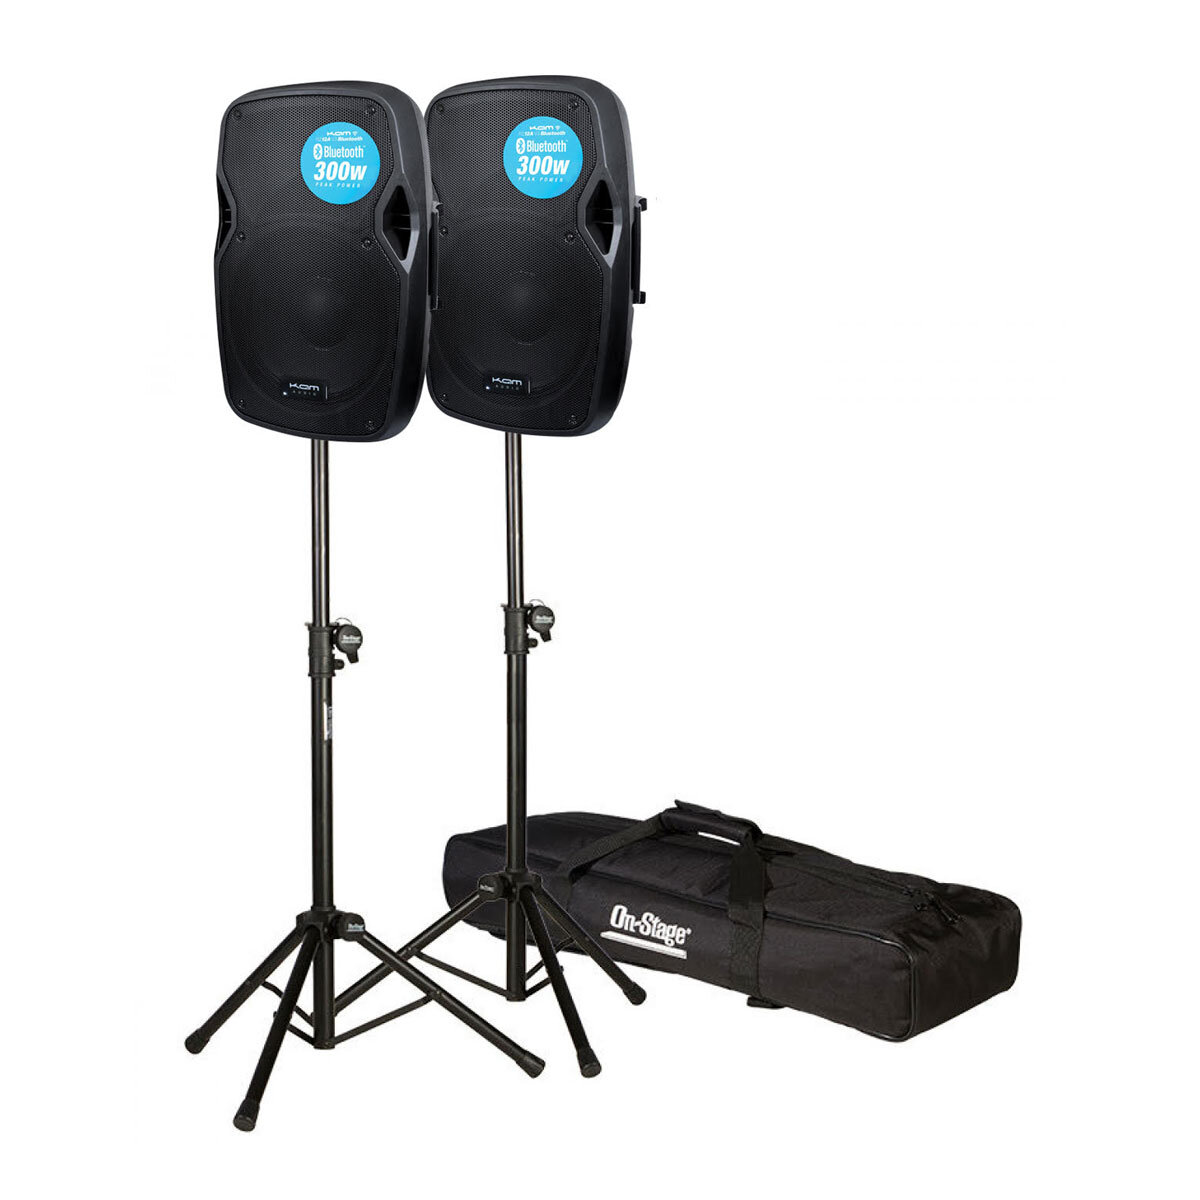 KAM RZ Bluetooth Speaker, Twin Pack with Stand in sizes